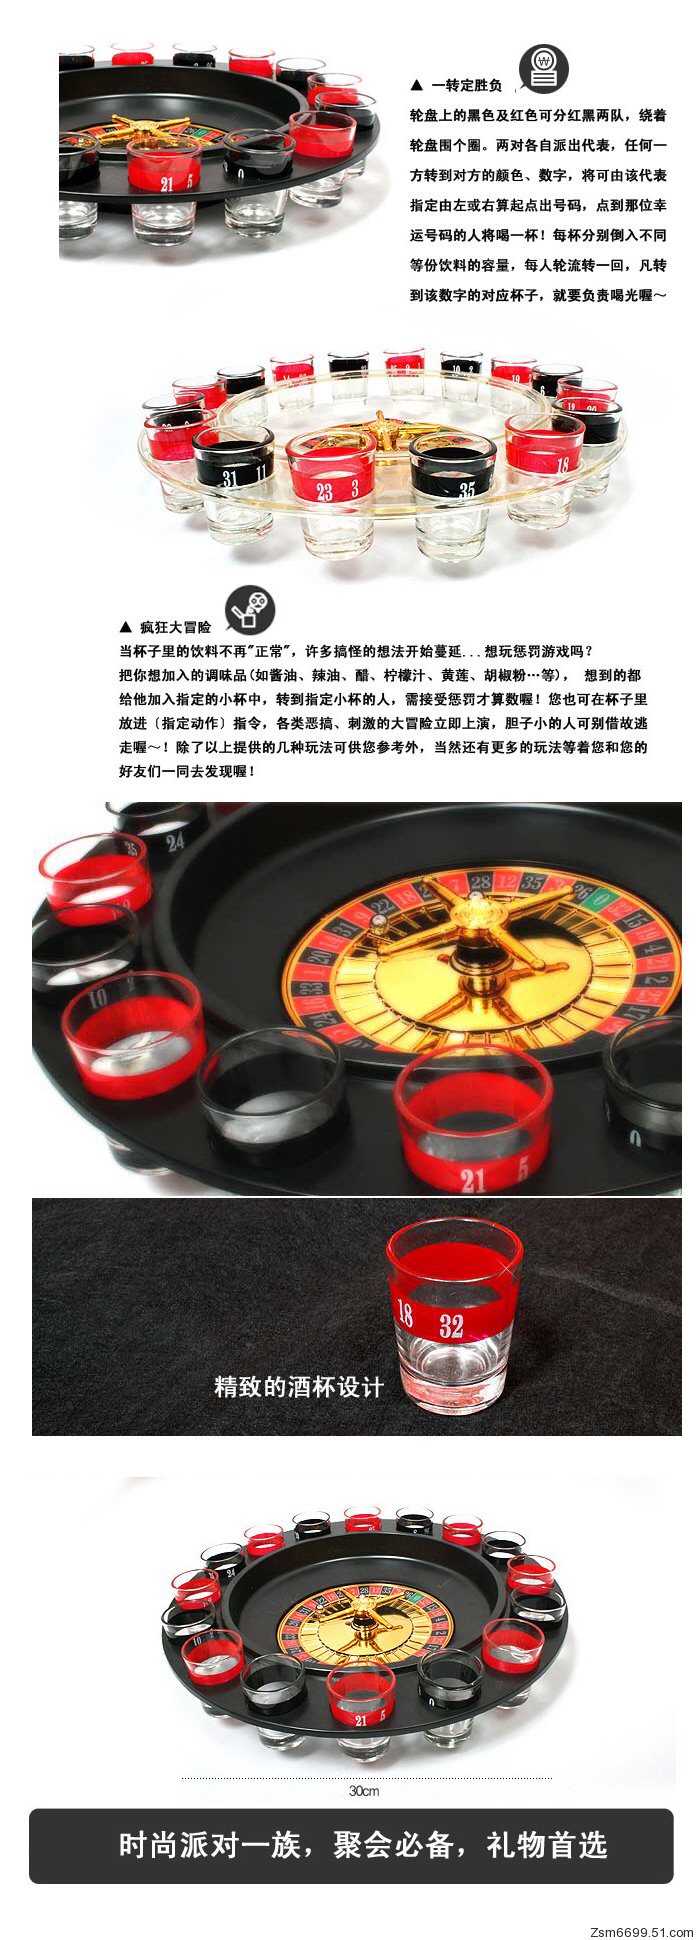 16 cup Russian turntable games5